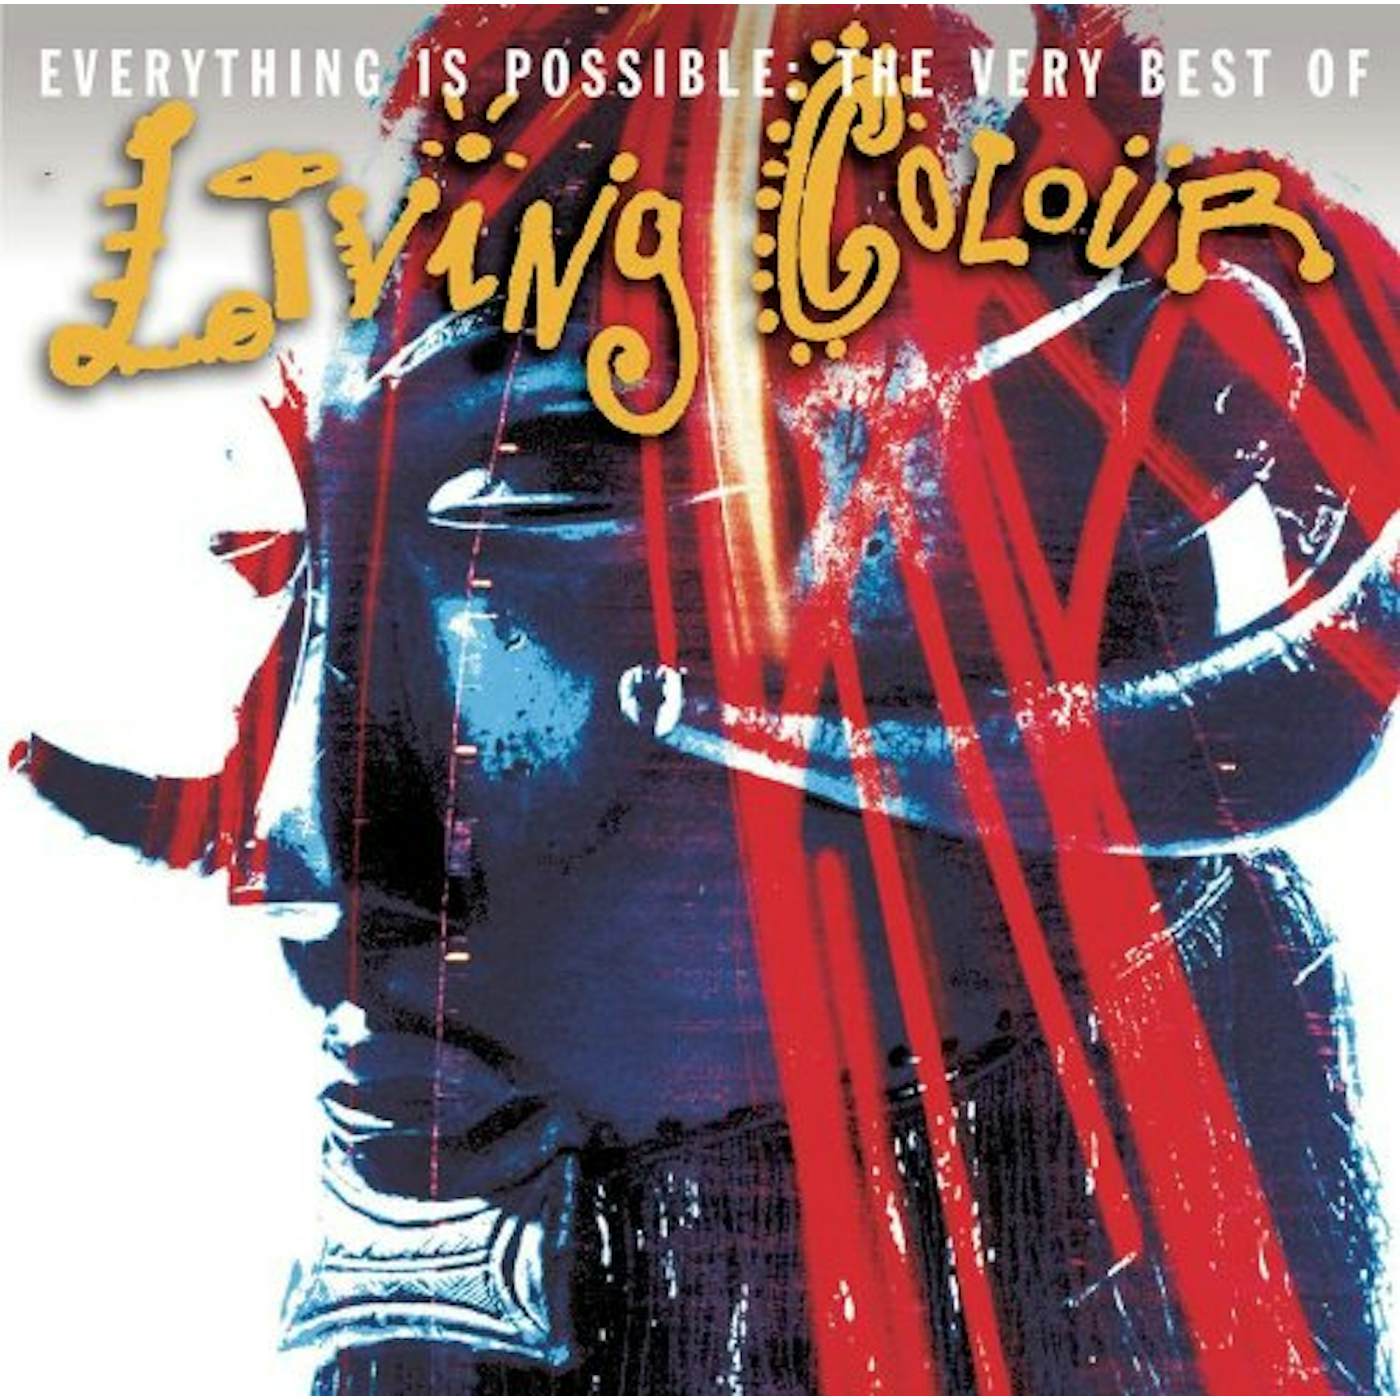 Living Colour EVERYTHING IS POSSIBLE: THE VERY BEST OF CD